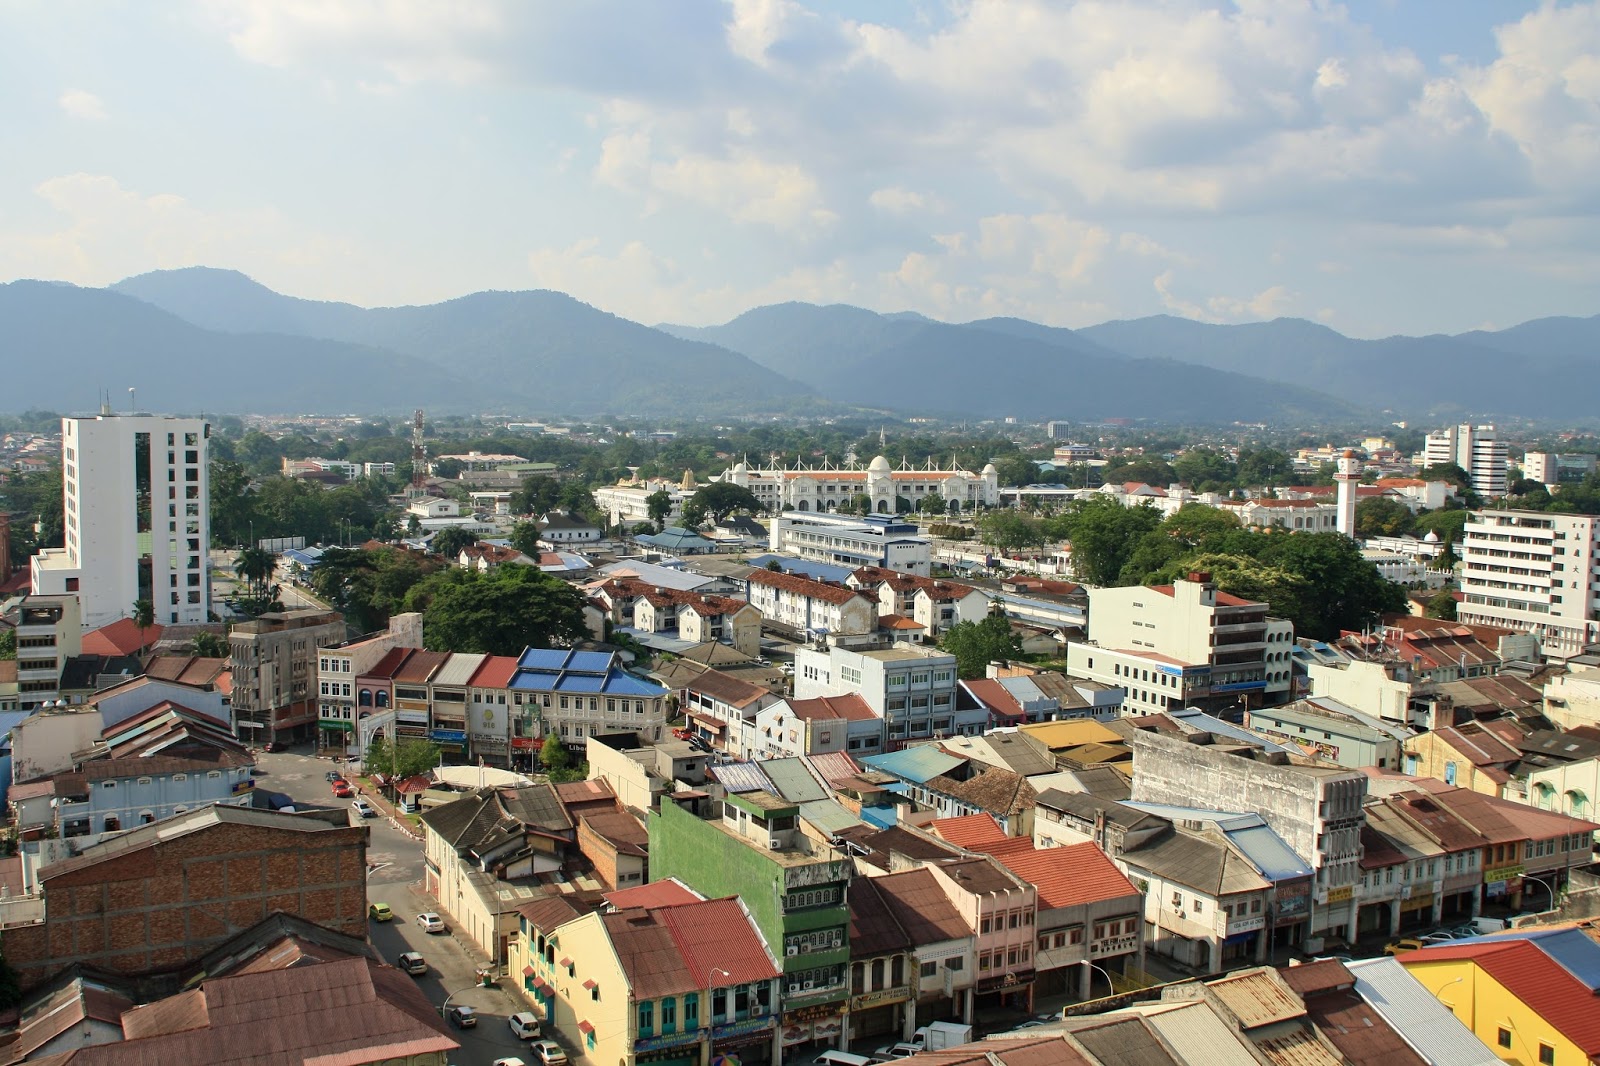 Images of Ipoh: Ipoh Skyline of January 2016